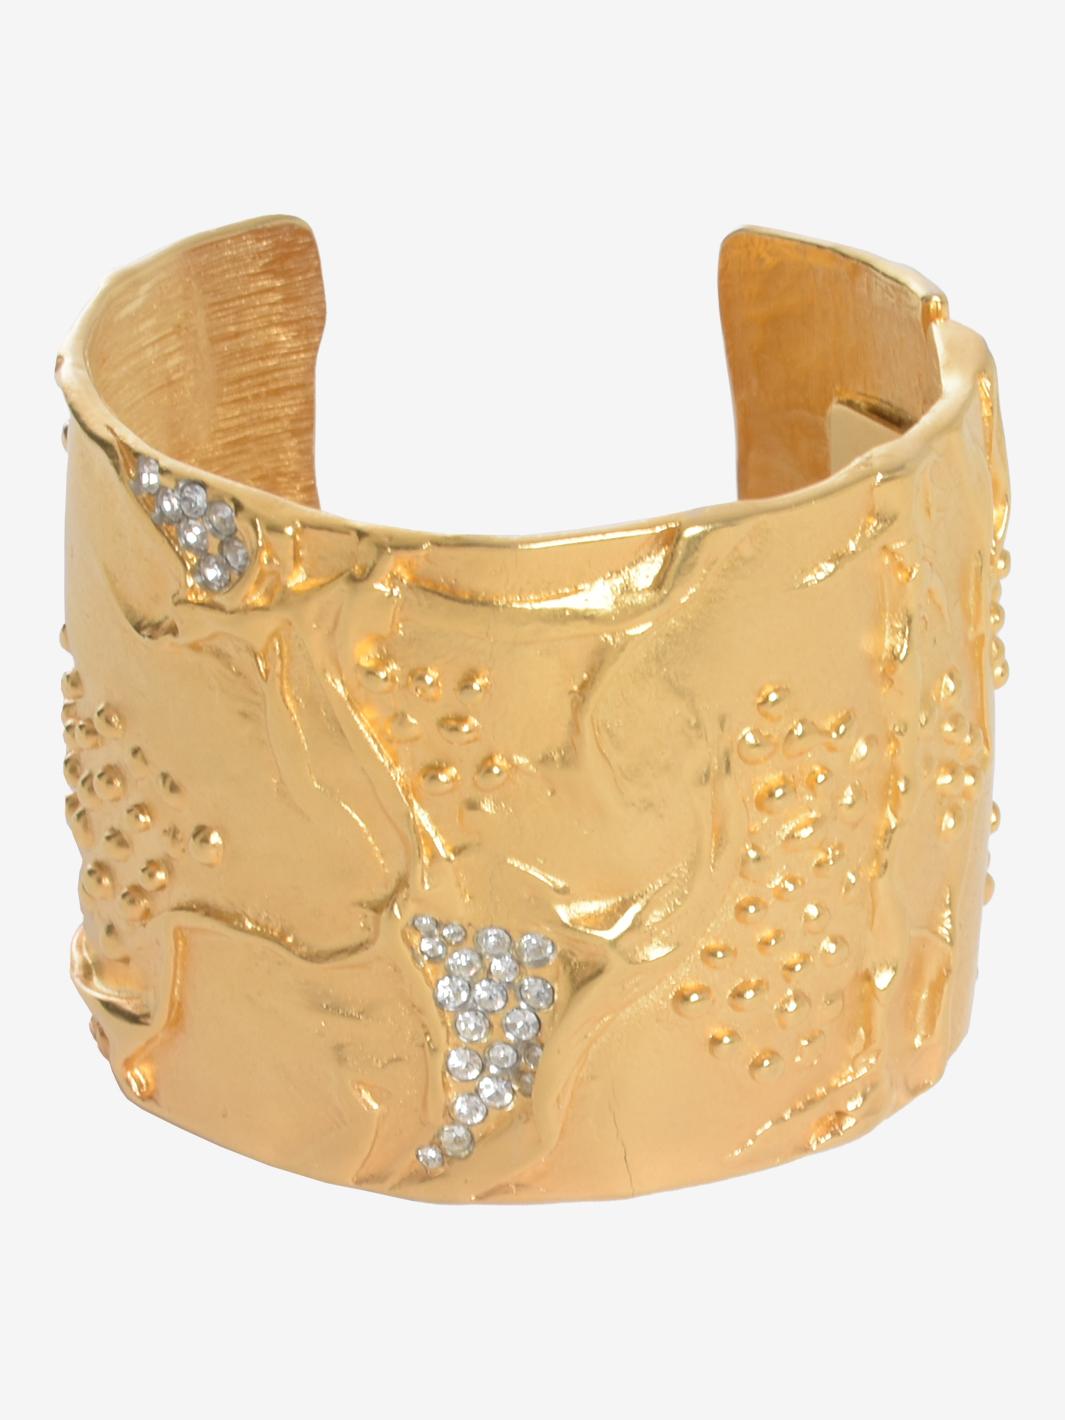 Women's or Men's Kenneth Jay Lane Gold Large Rigid Band Bracelet With Rhinestones For Sale